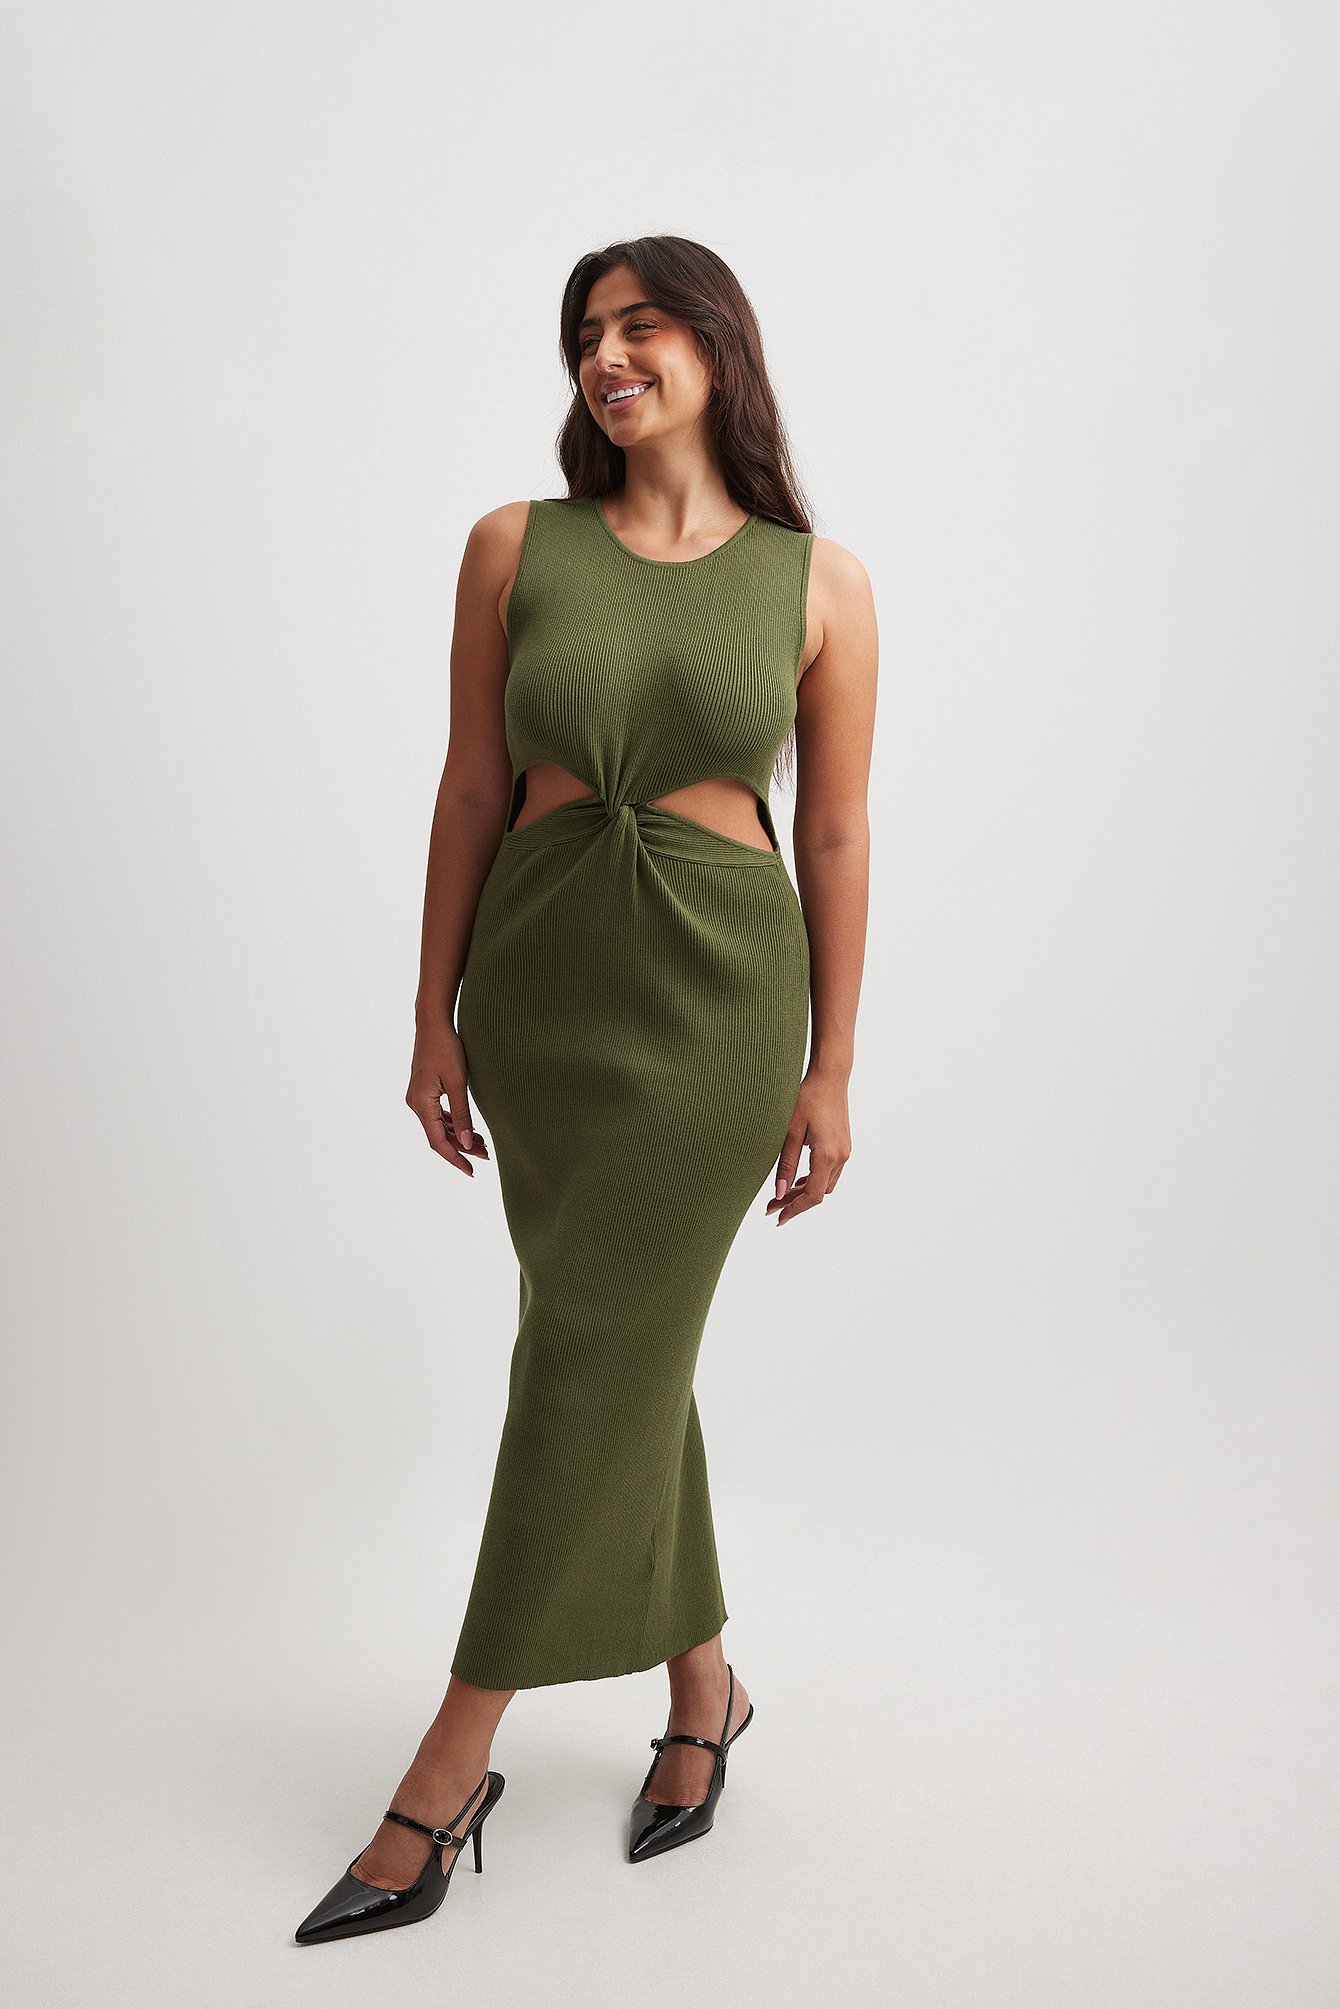 I Saw It First Petite ribbed mini dress with twist front in green